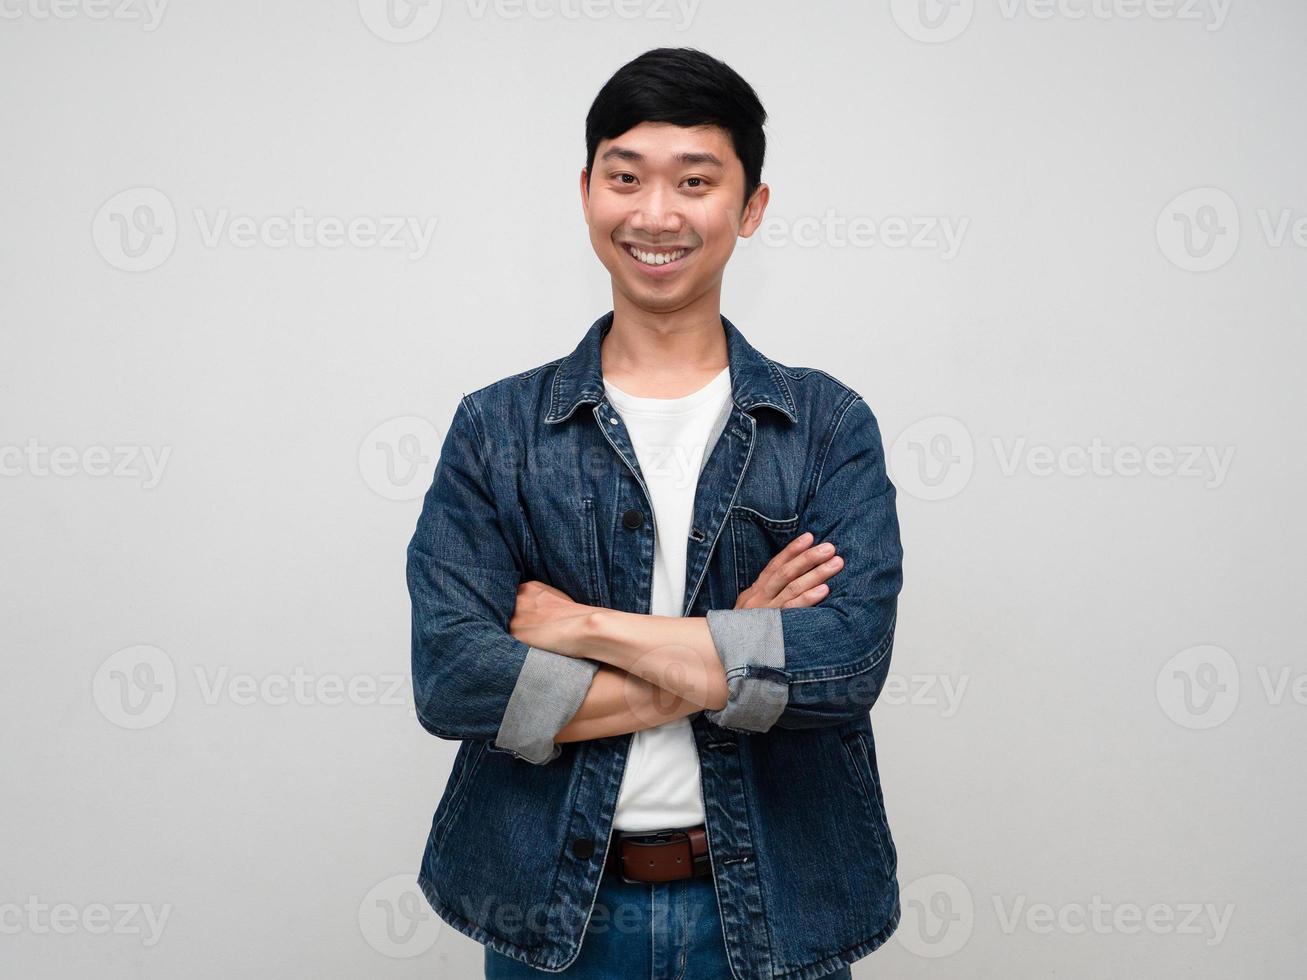 Positive man jeans shirt handsome looking gesture crossed arms smile isolated photo